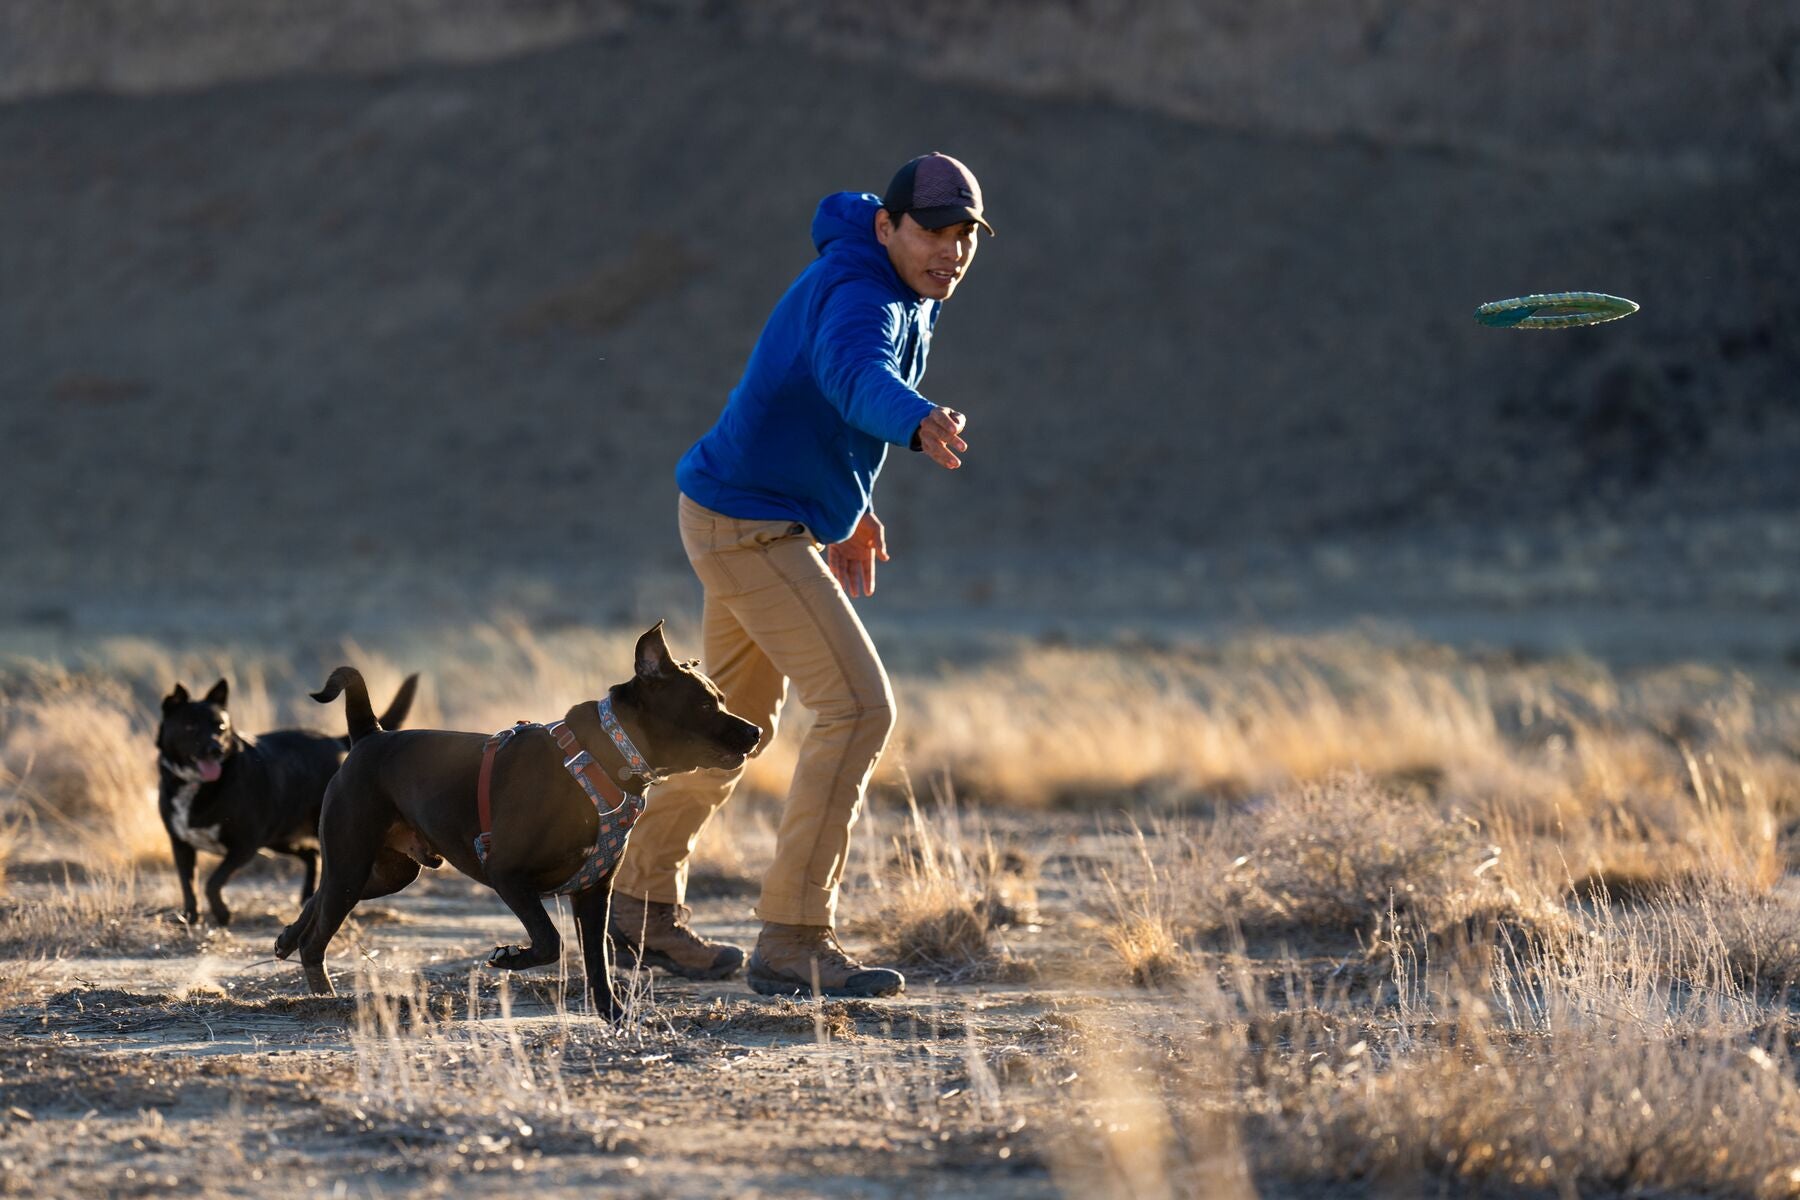 Vernan Kee throws a toy for two of his dogs while on a hike.